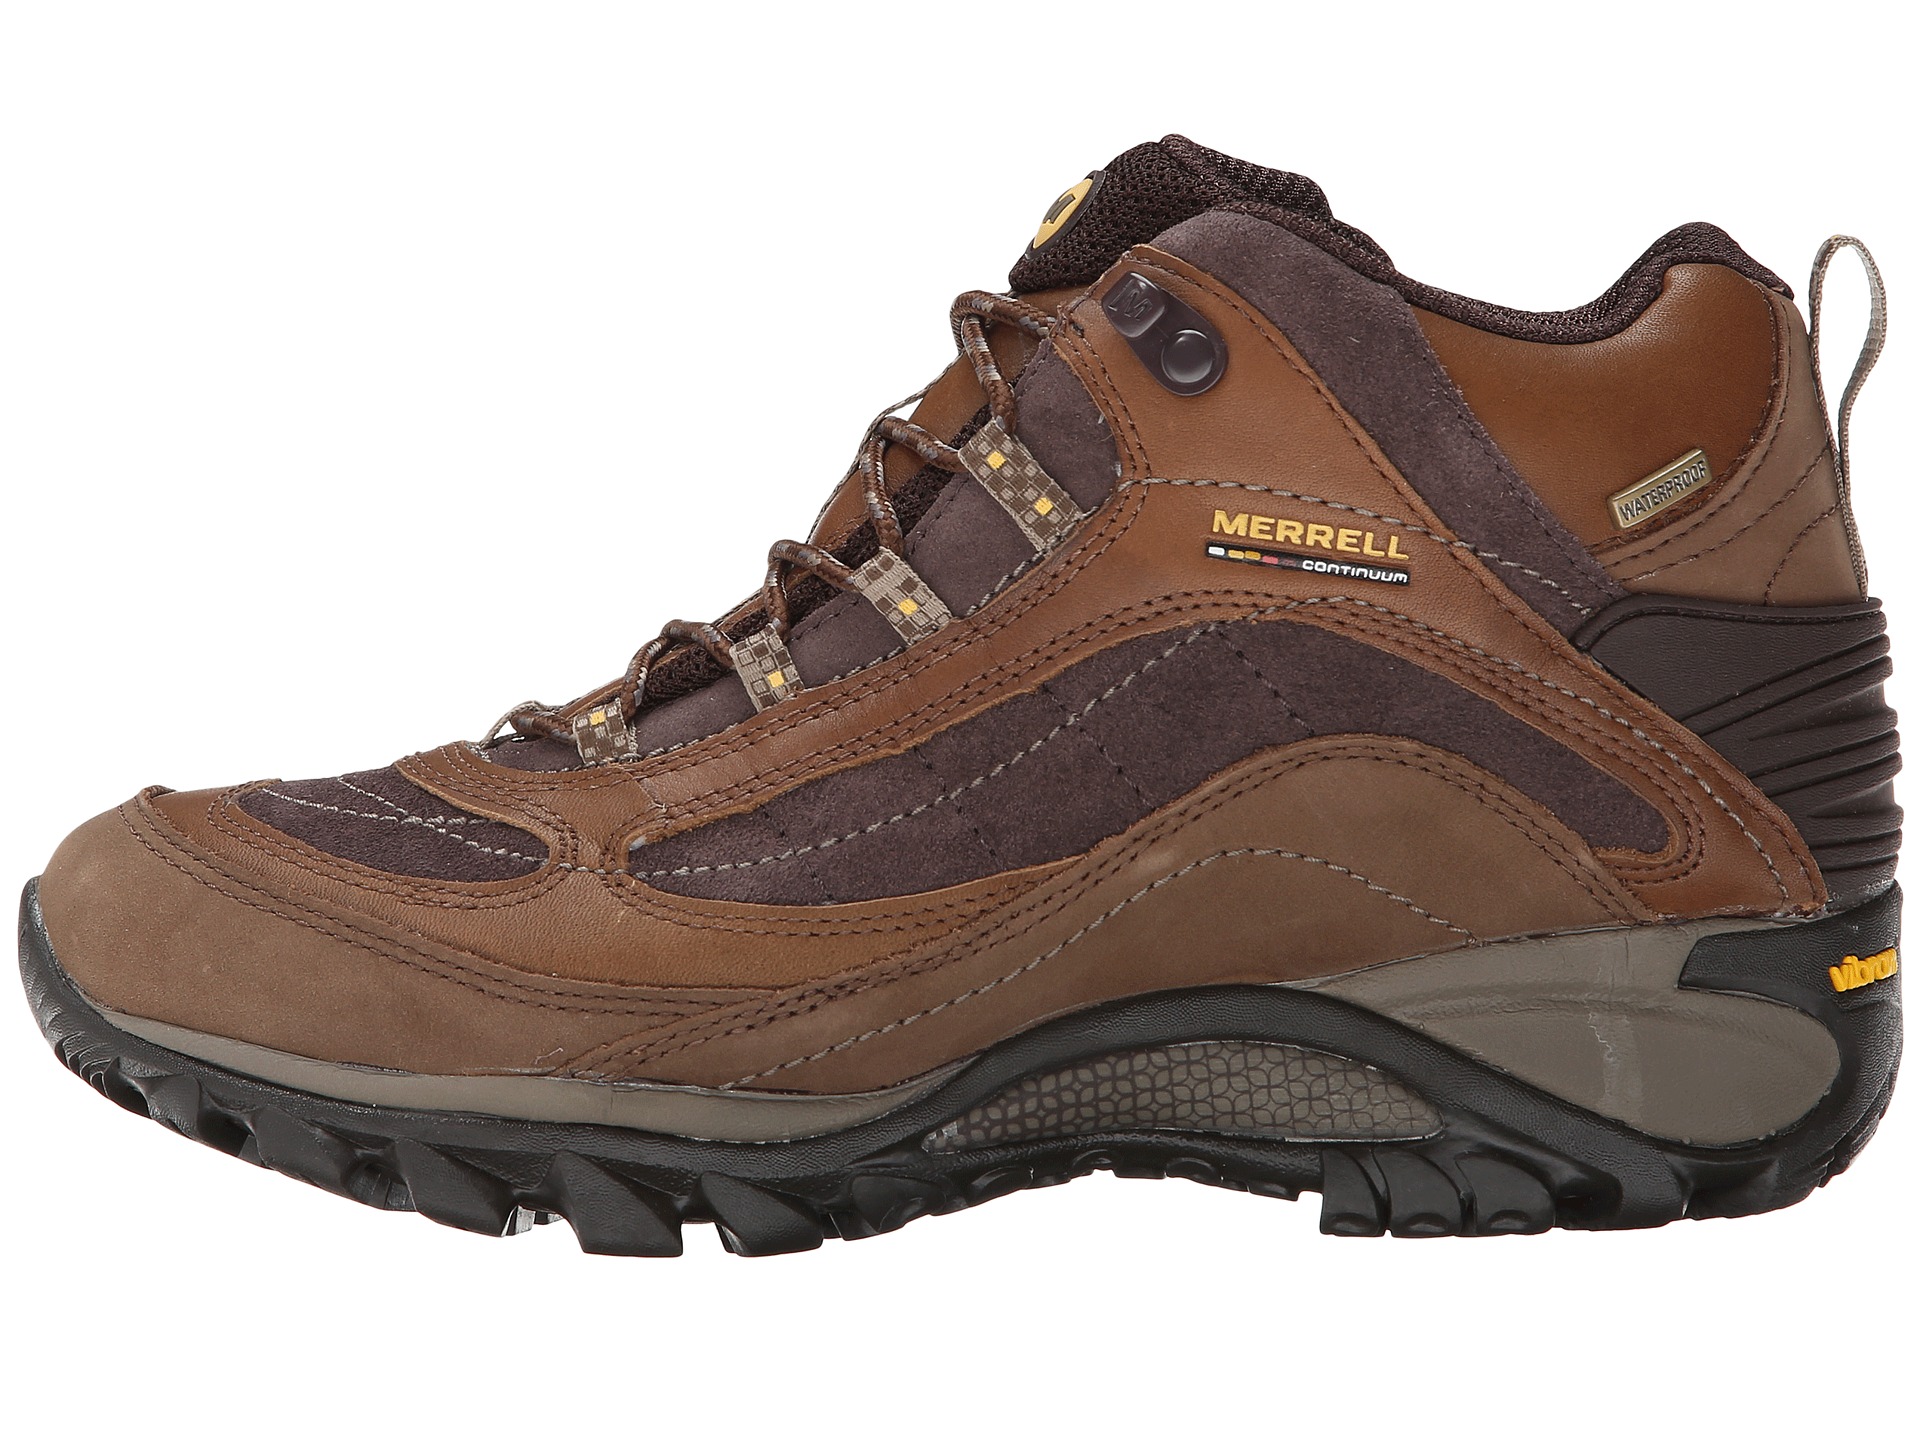 Merrell Siren Waterproof Mid Leather Brown - Zappos.com Free Shipping ...